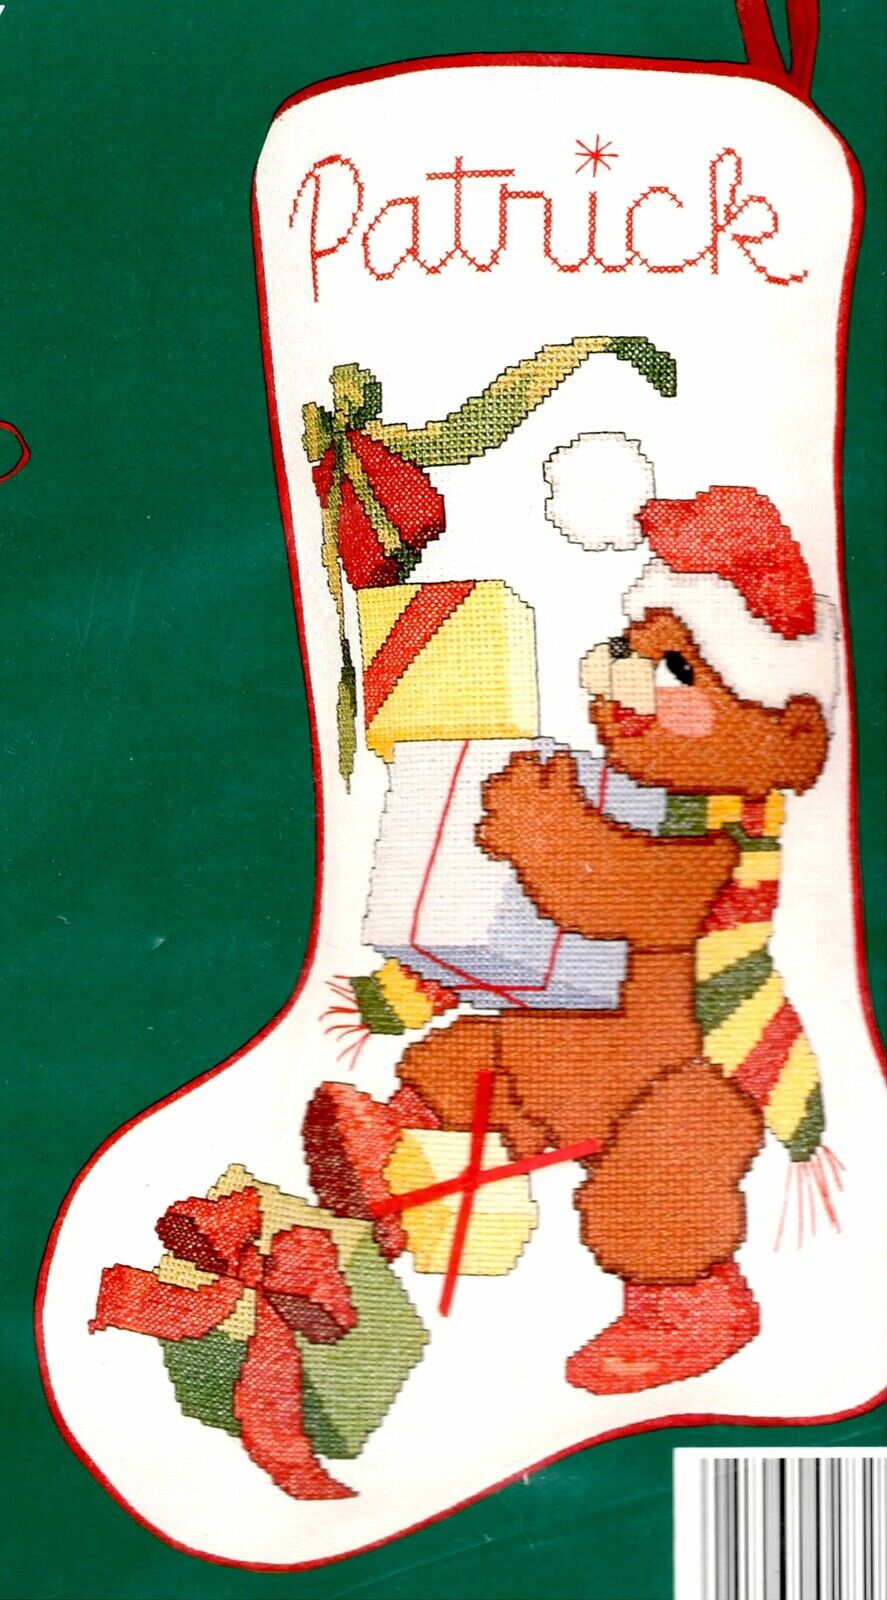 DIY Presents from Teddy Bear Christmas NO Count Cross Stitch Stocking Kit 02828